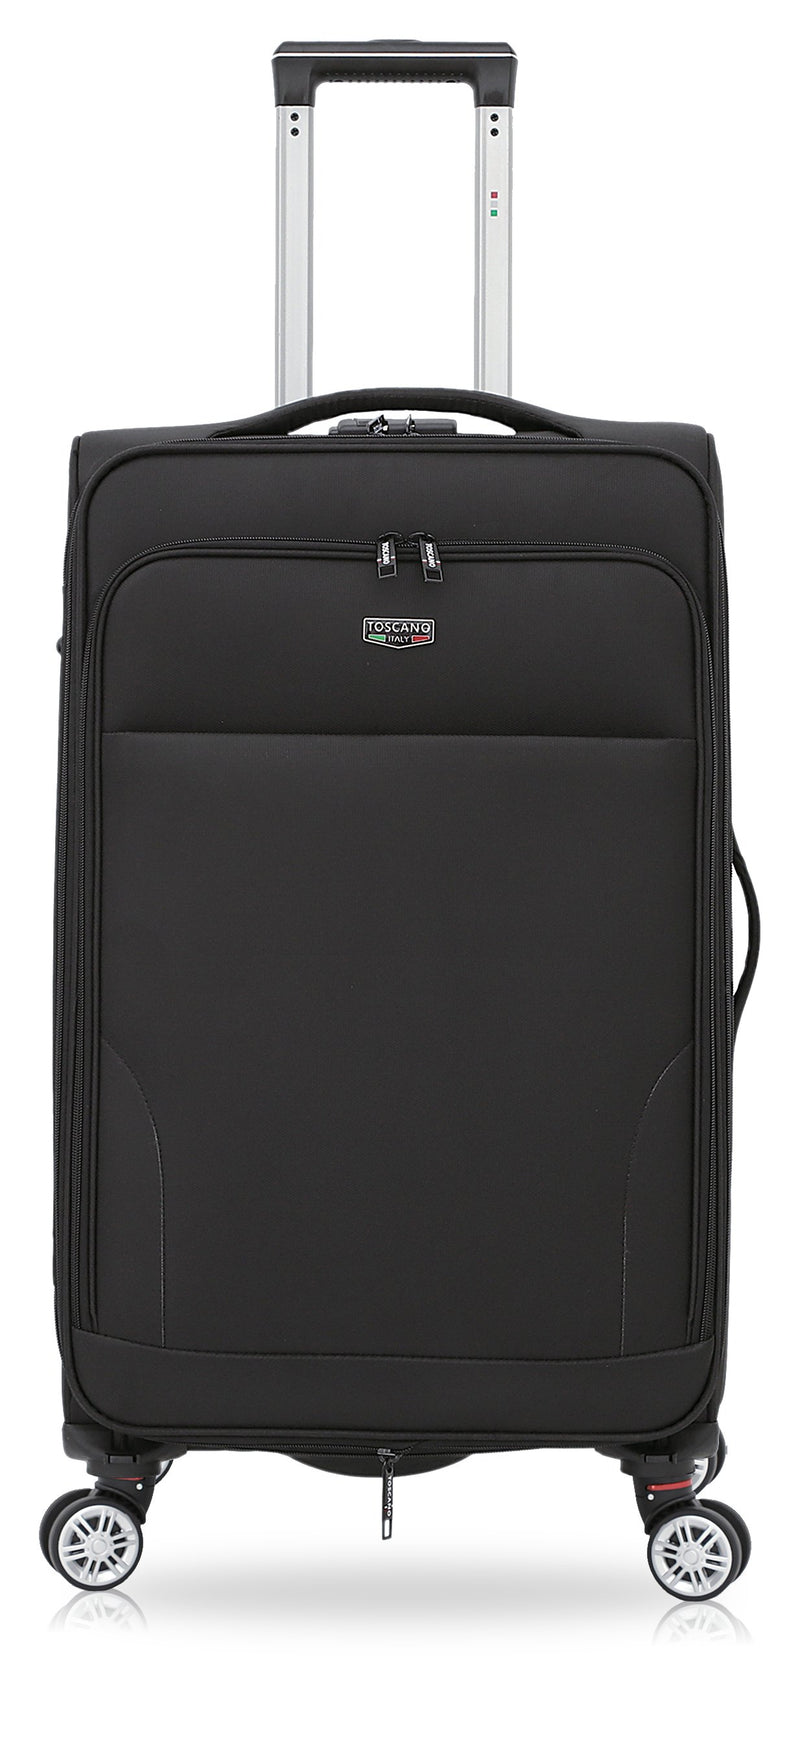 TOSCANO by Tucci 21-inch Ricerca Lightweight Carry On  Luggage Suitcase